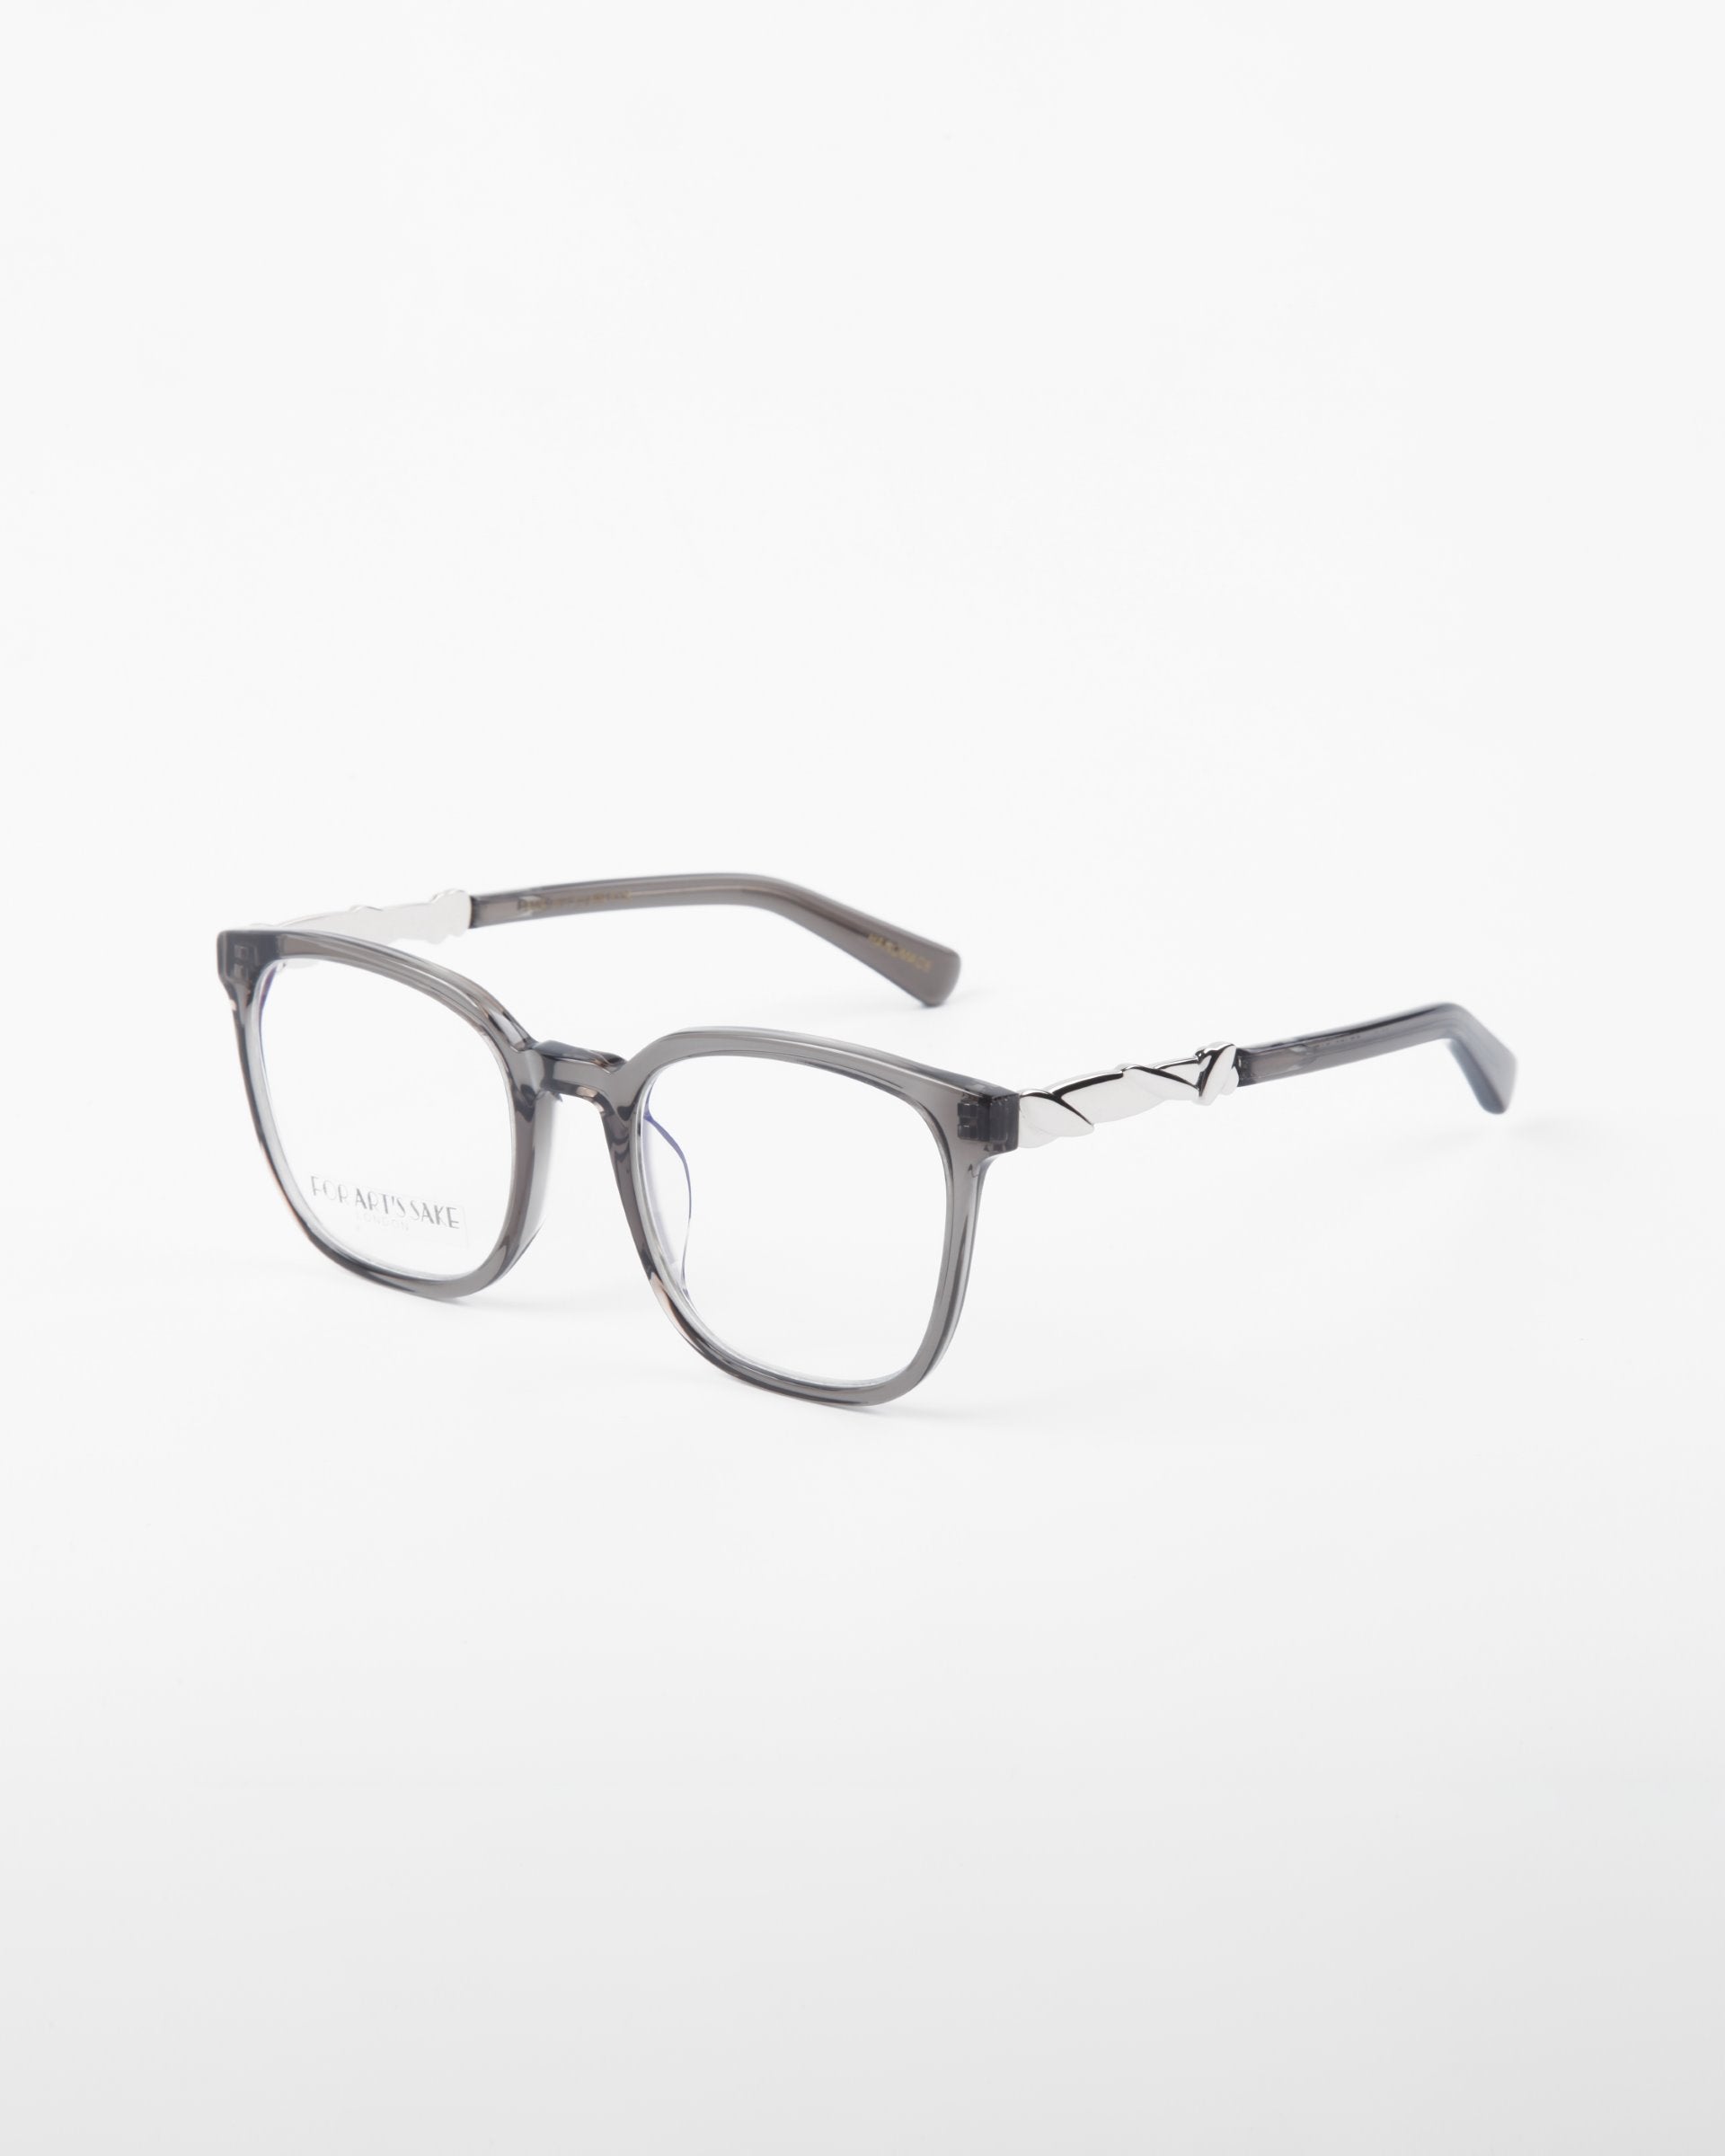 A pair of gray square eyeglasses made from plant-based acetate with a subtle transparent frame and silver accents on the temples. These stylish Molten prescription eyewear glasses by For Art&#39;s Sake® are displayed against a plain white background.